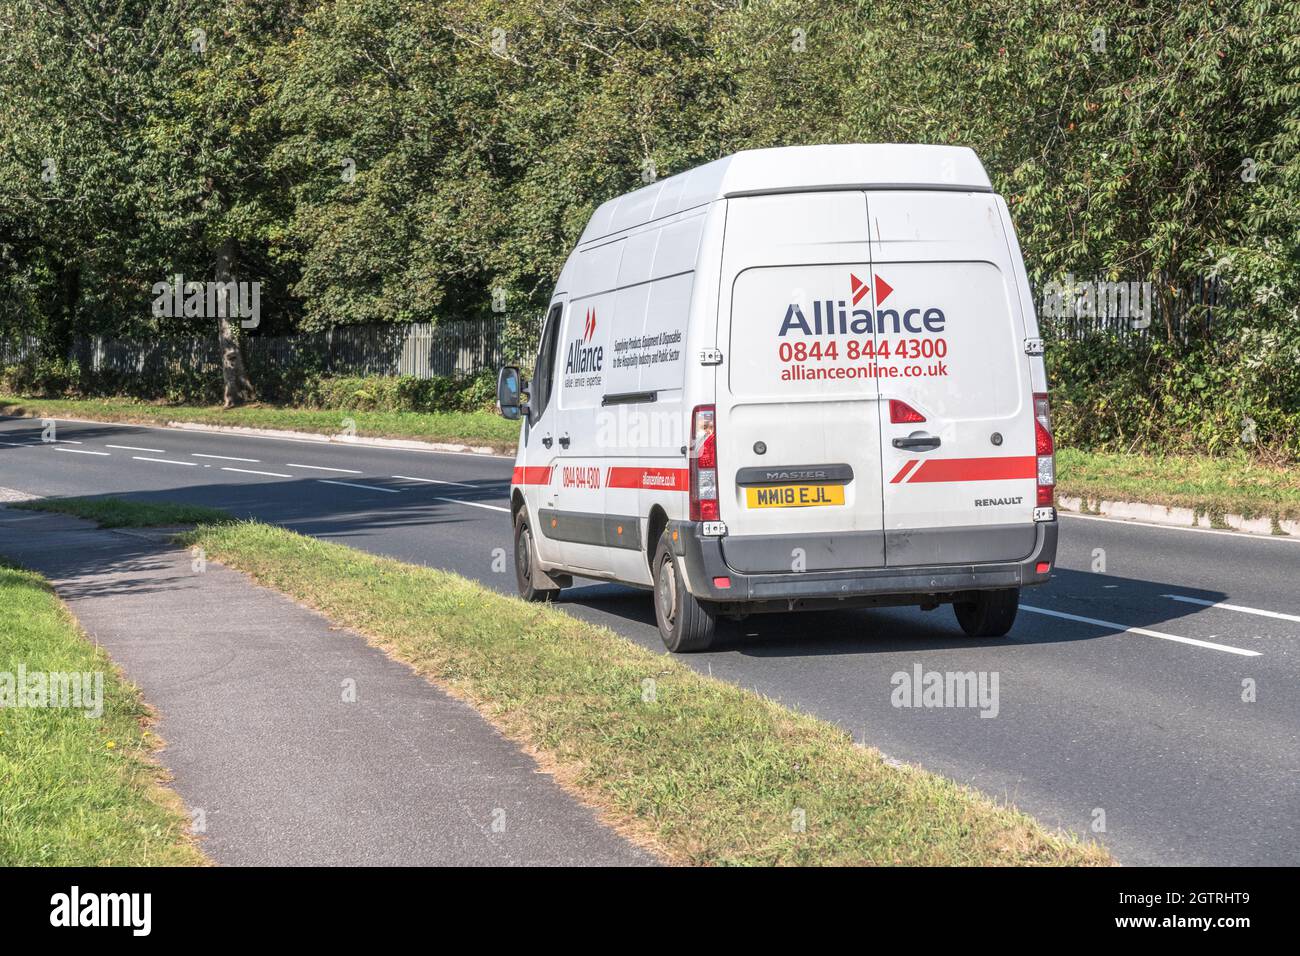 Alliance catering supplies Renault delivery van going downhill on country road. For UK driver shortage, goods delivery during Covid, UK transport Stock Photo